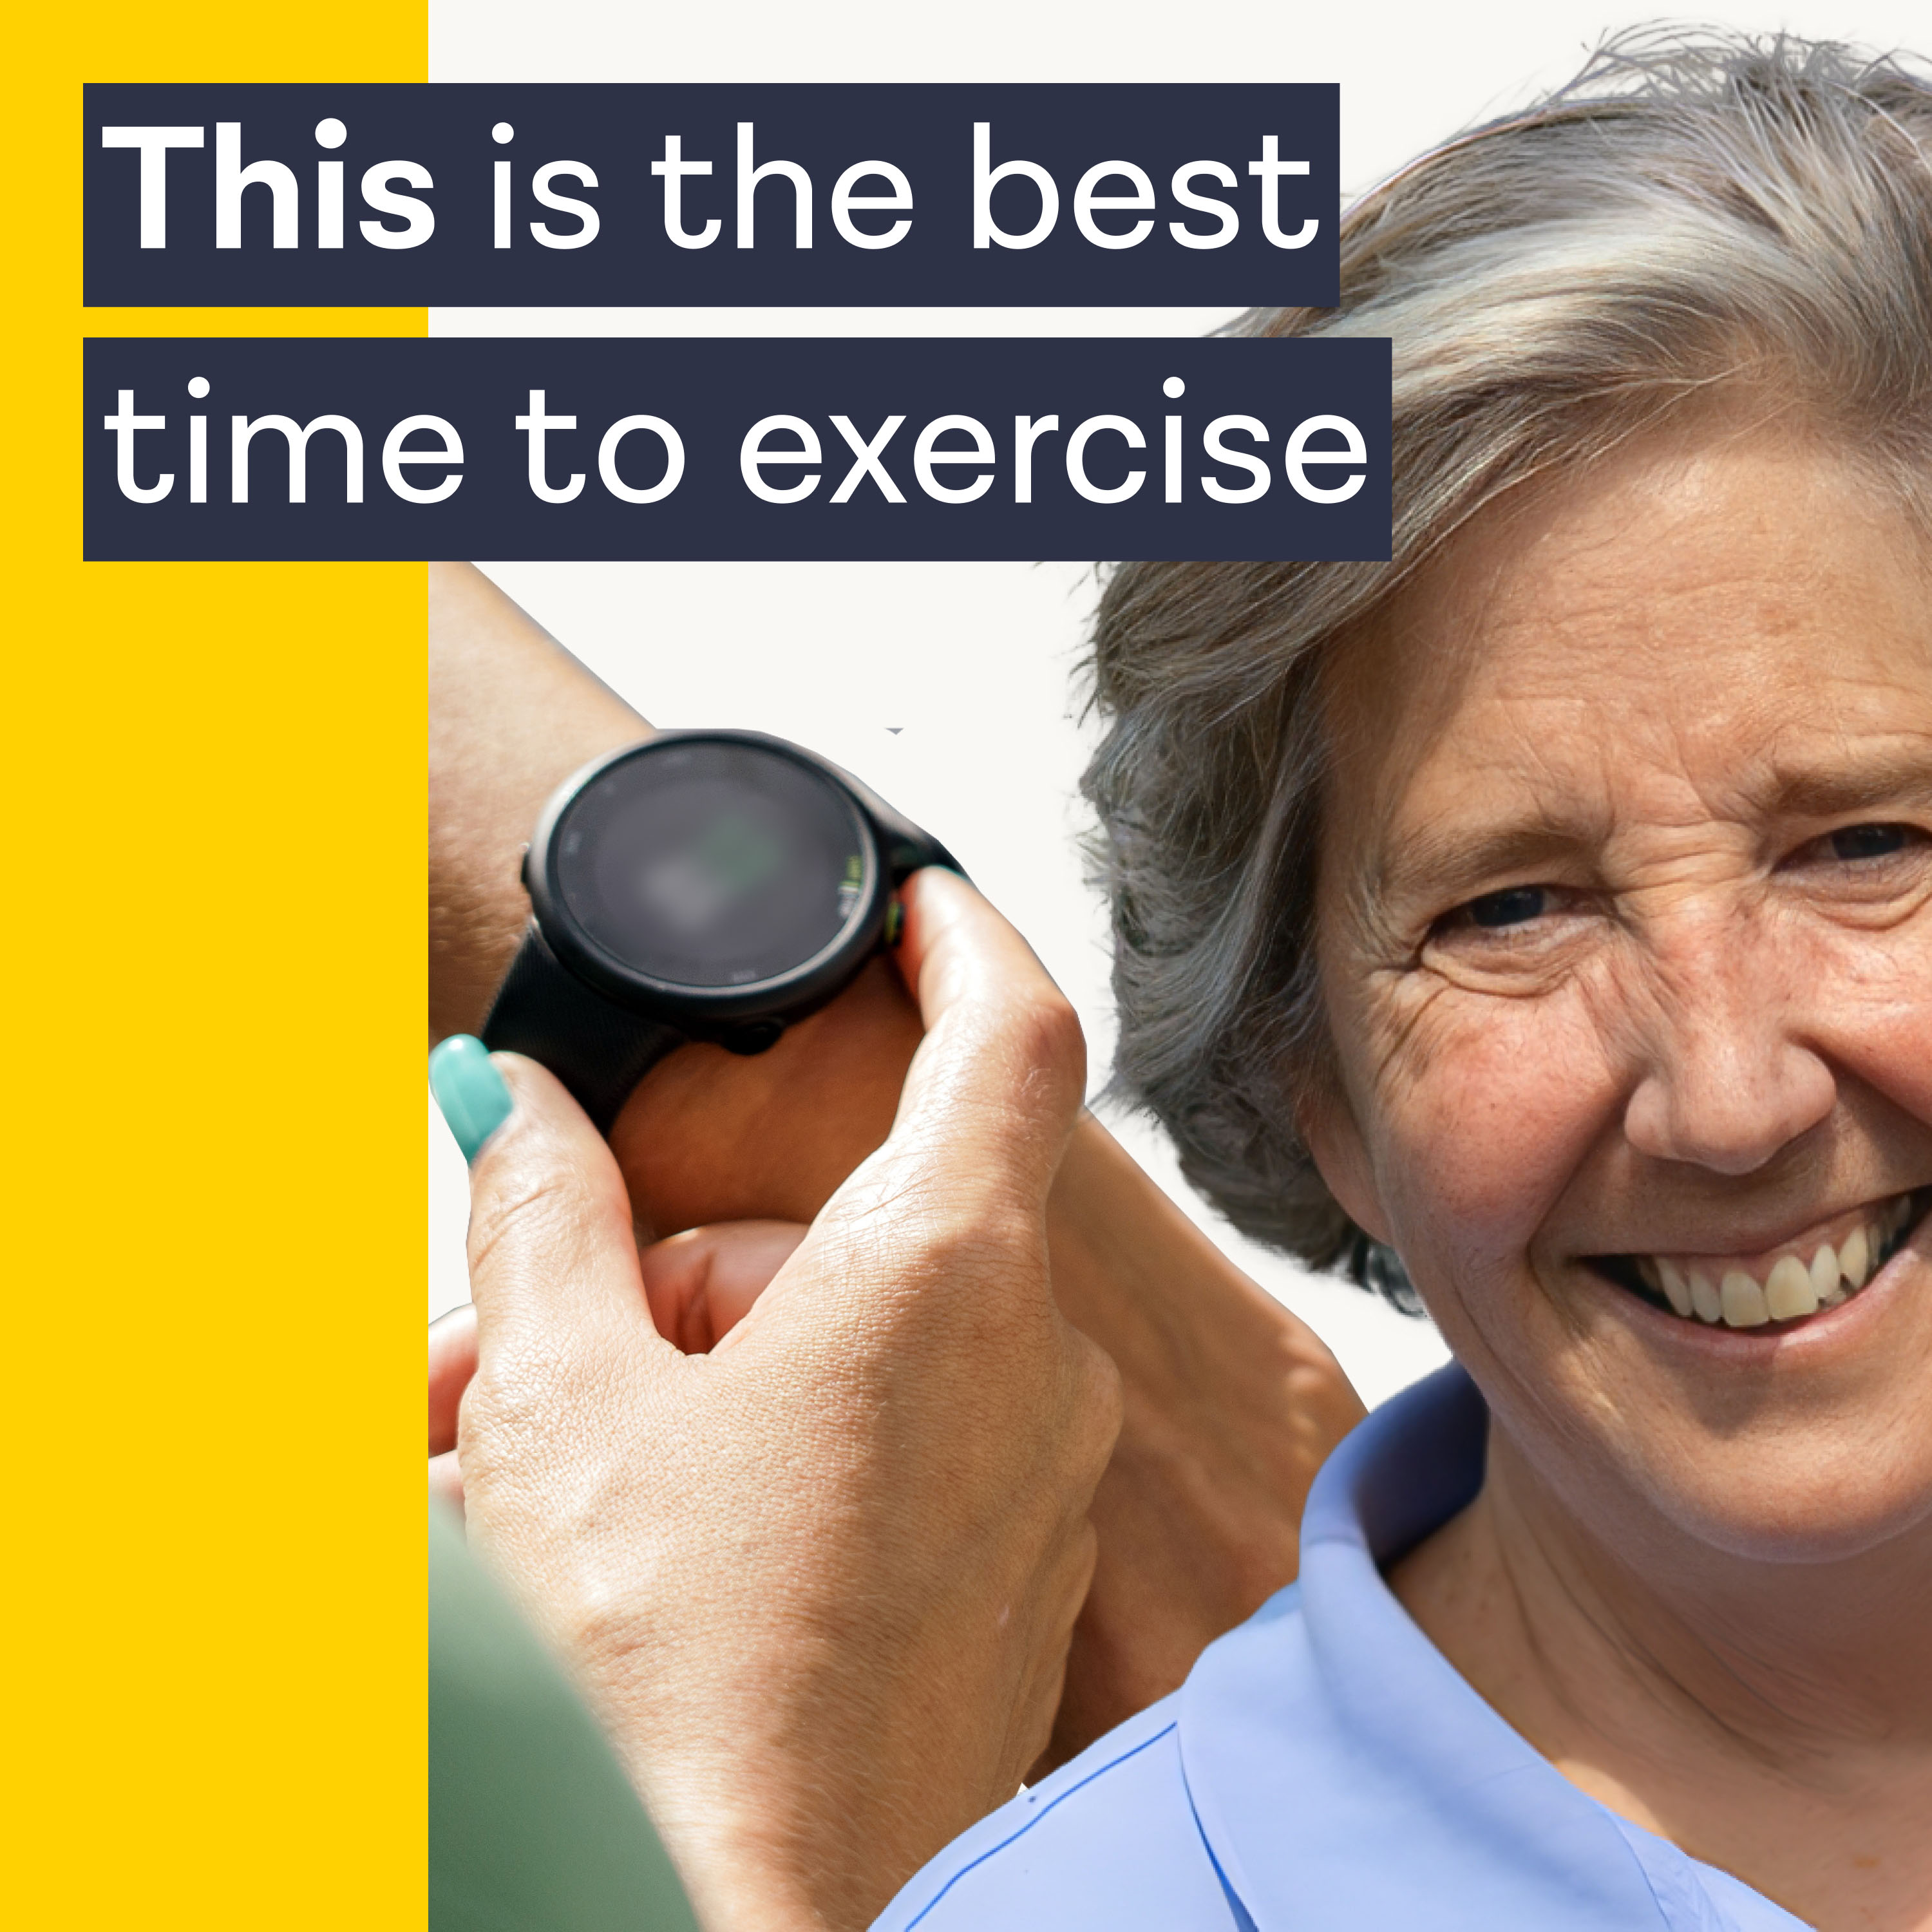 The best exercise routine, according to your muscle clocks with Professor Karyn Esser by ZOE